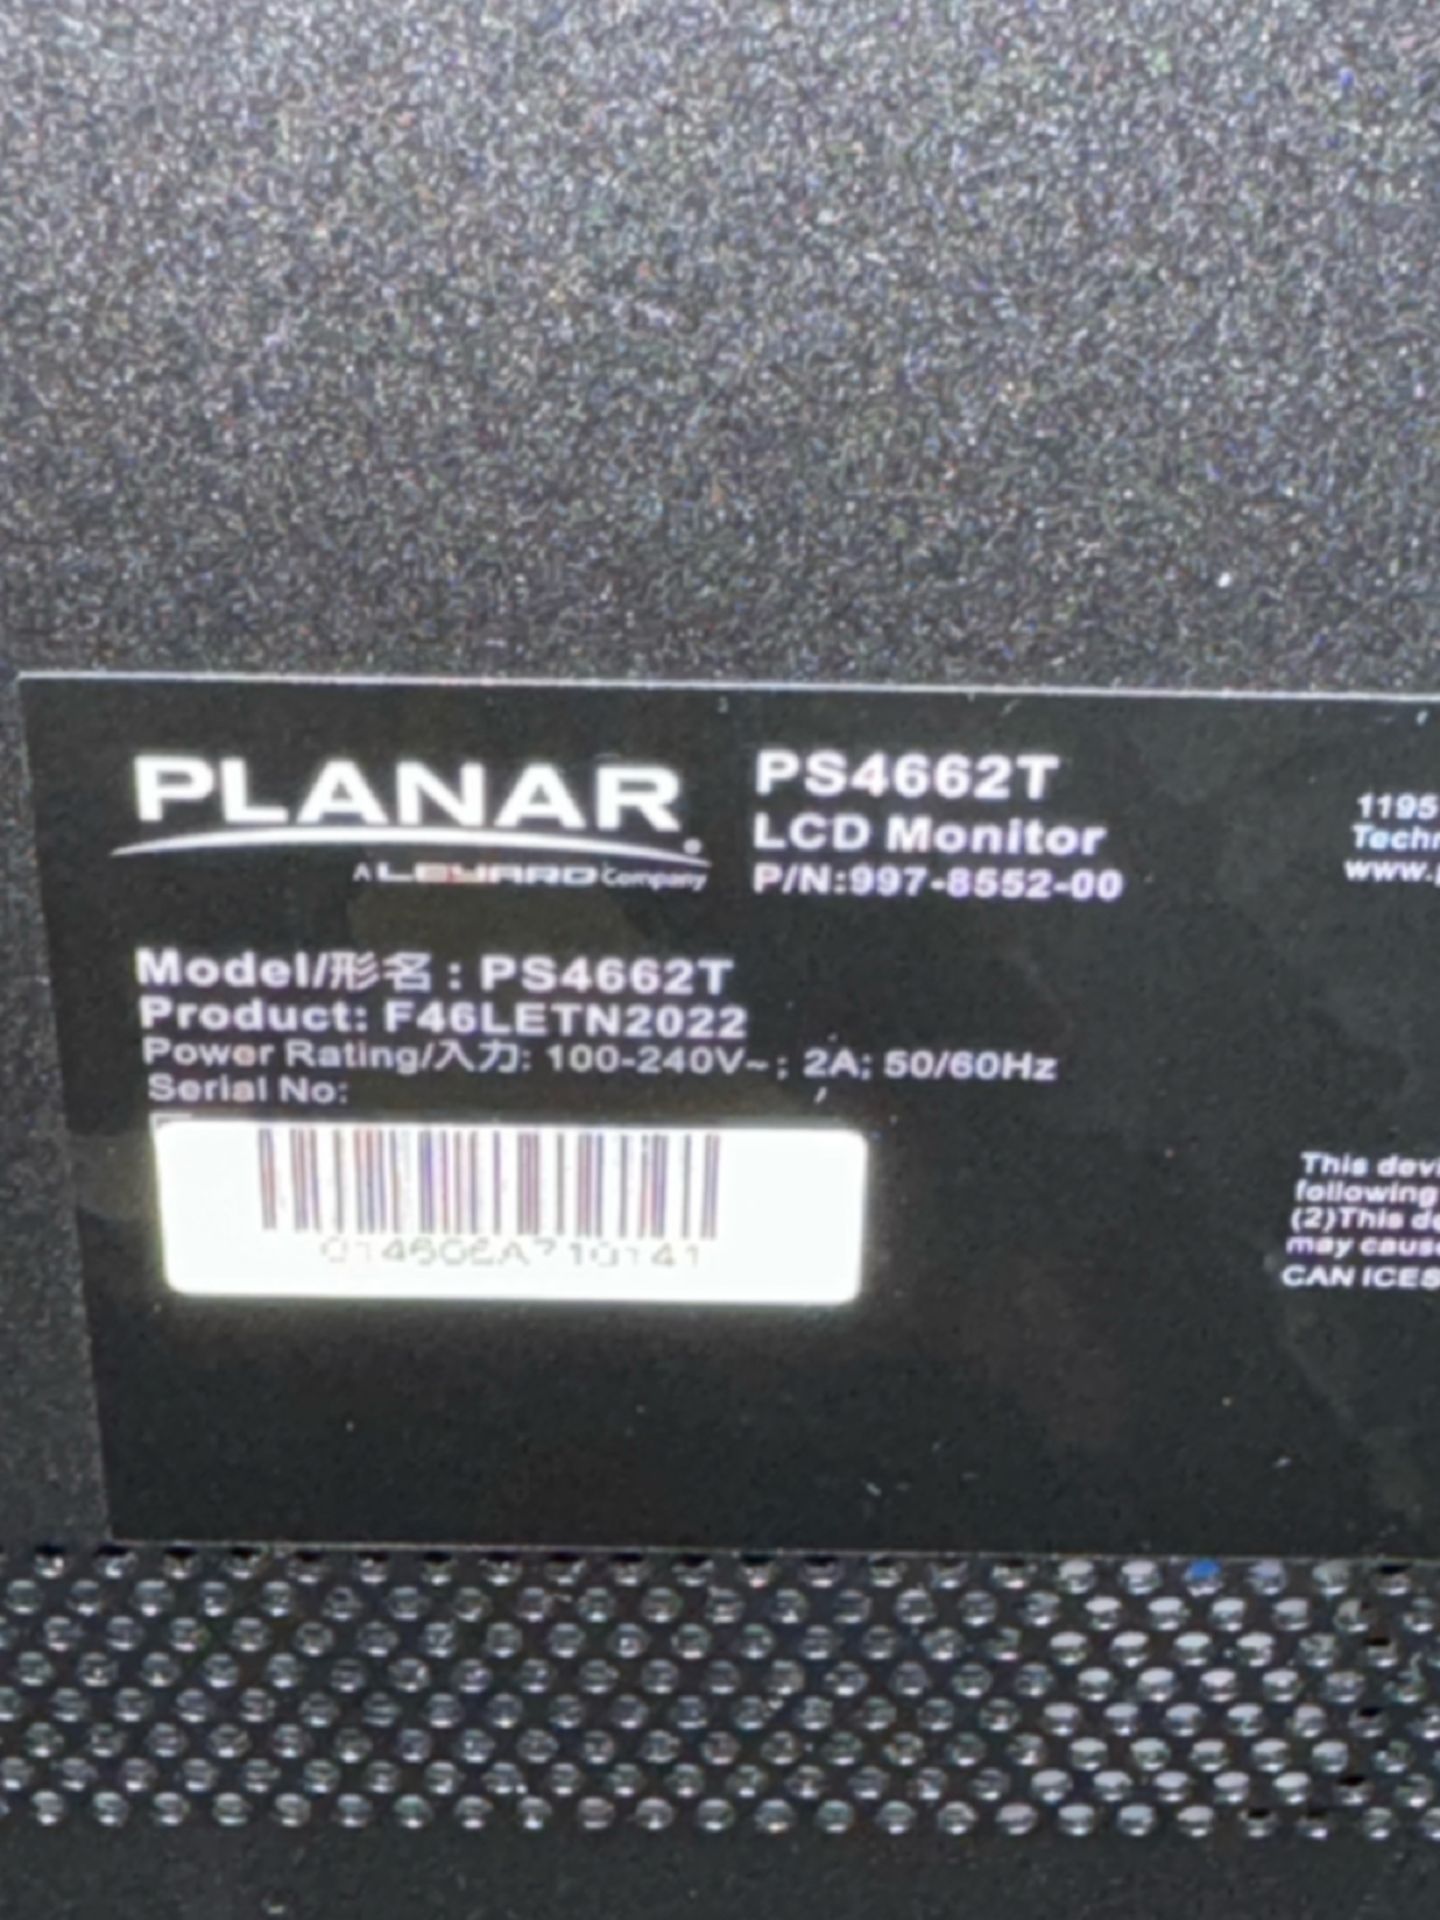 Planar LCD Monitor w/ Case - Image 4 of 4